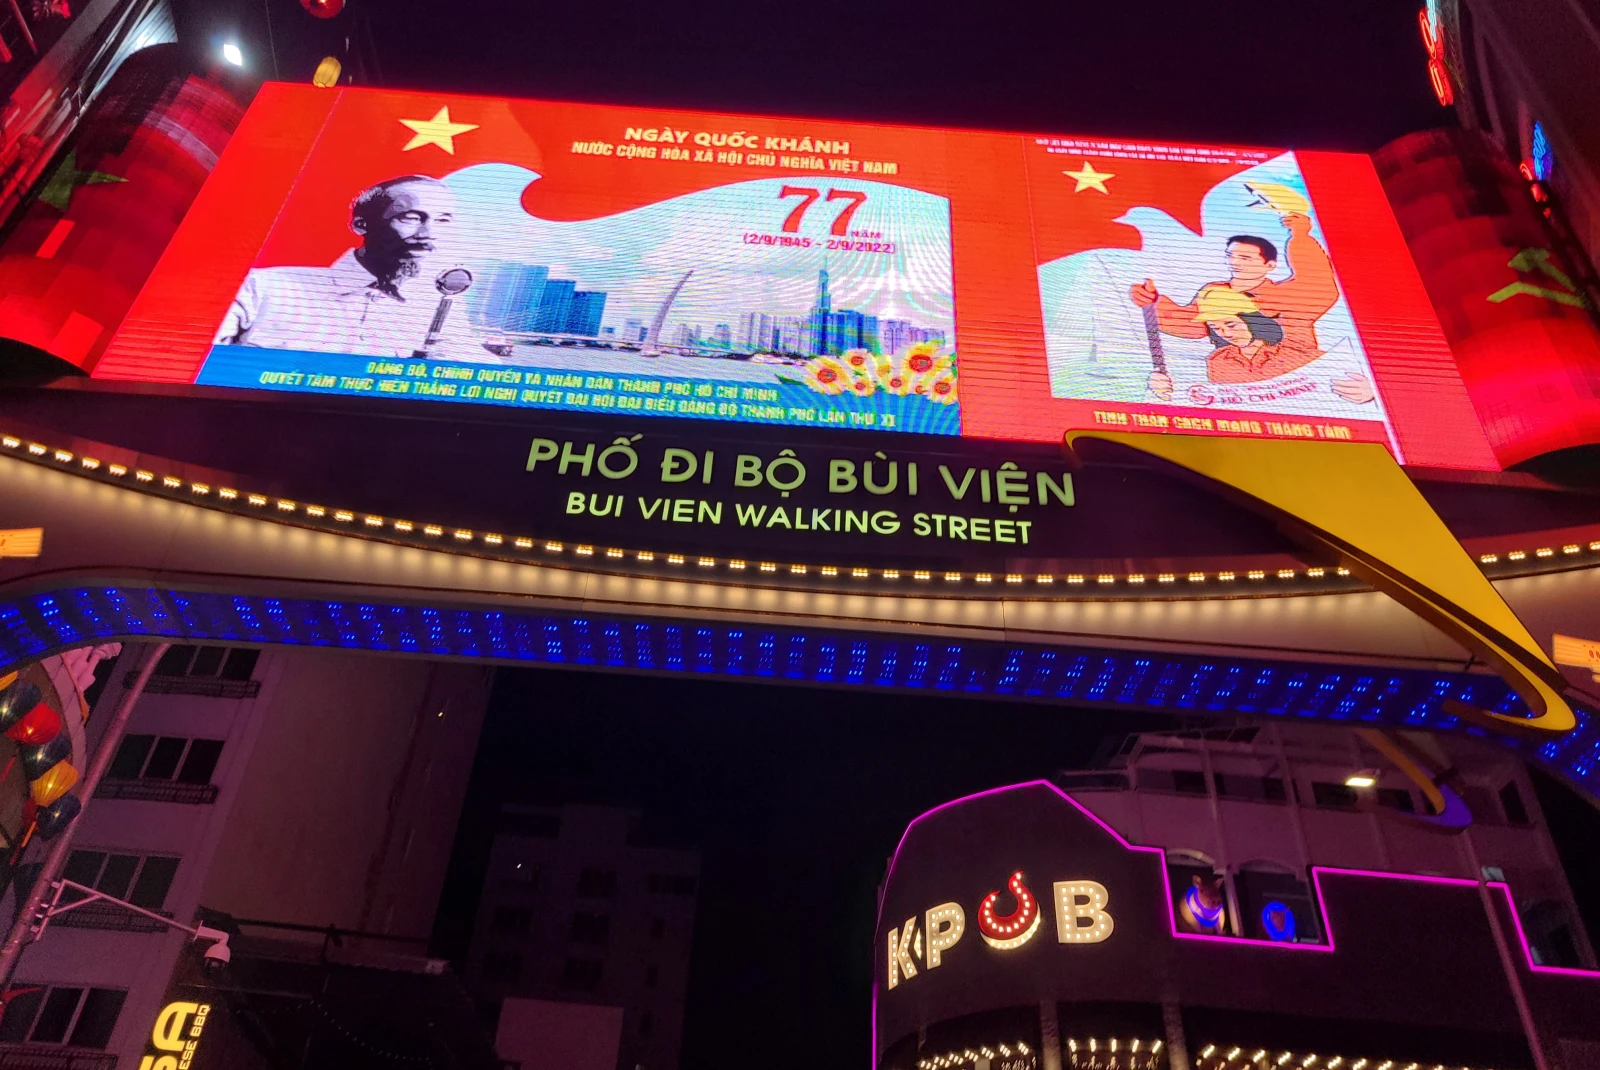 Pho Di Bo Bui Vien has become an extremely familiar entertainment destination for young people, especially for domestic and foreign tourists.